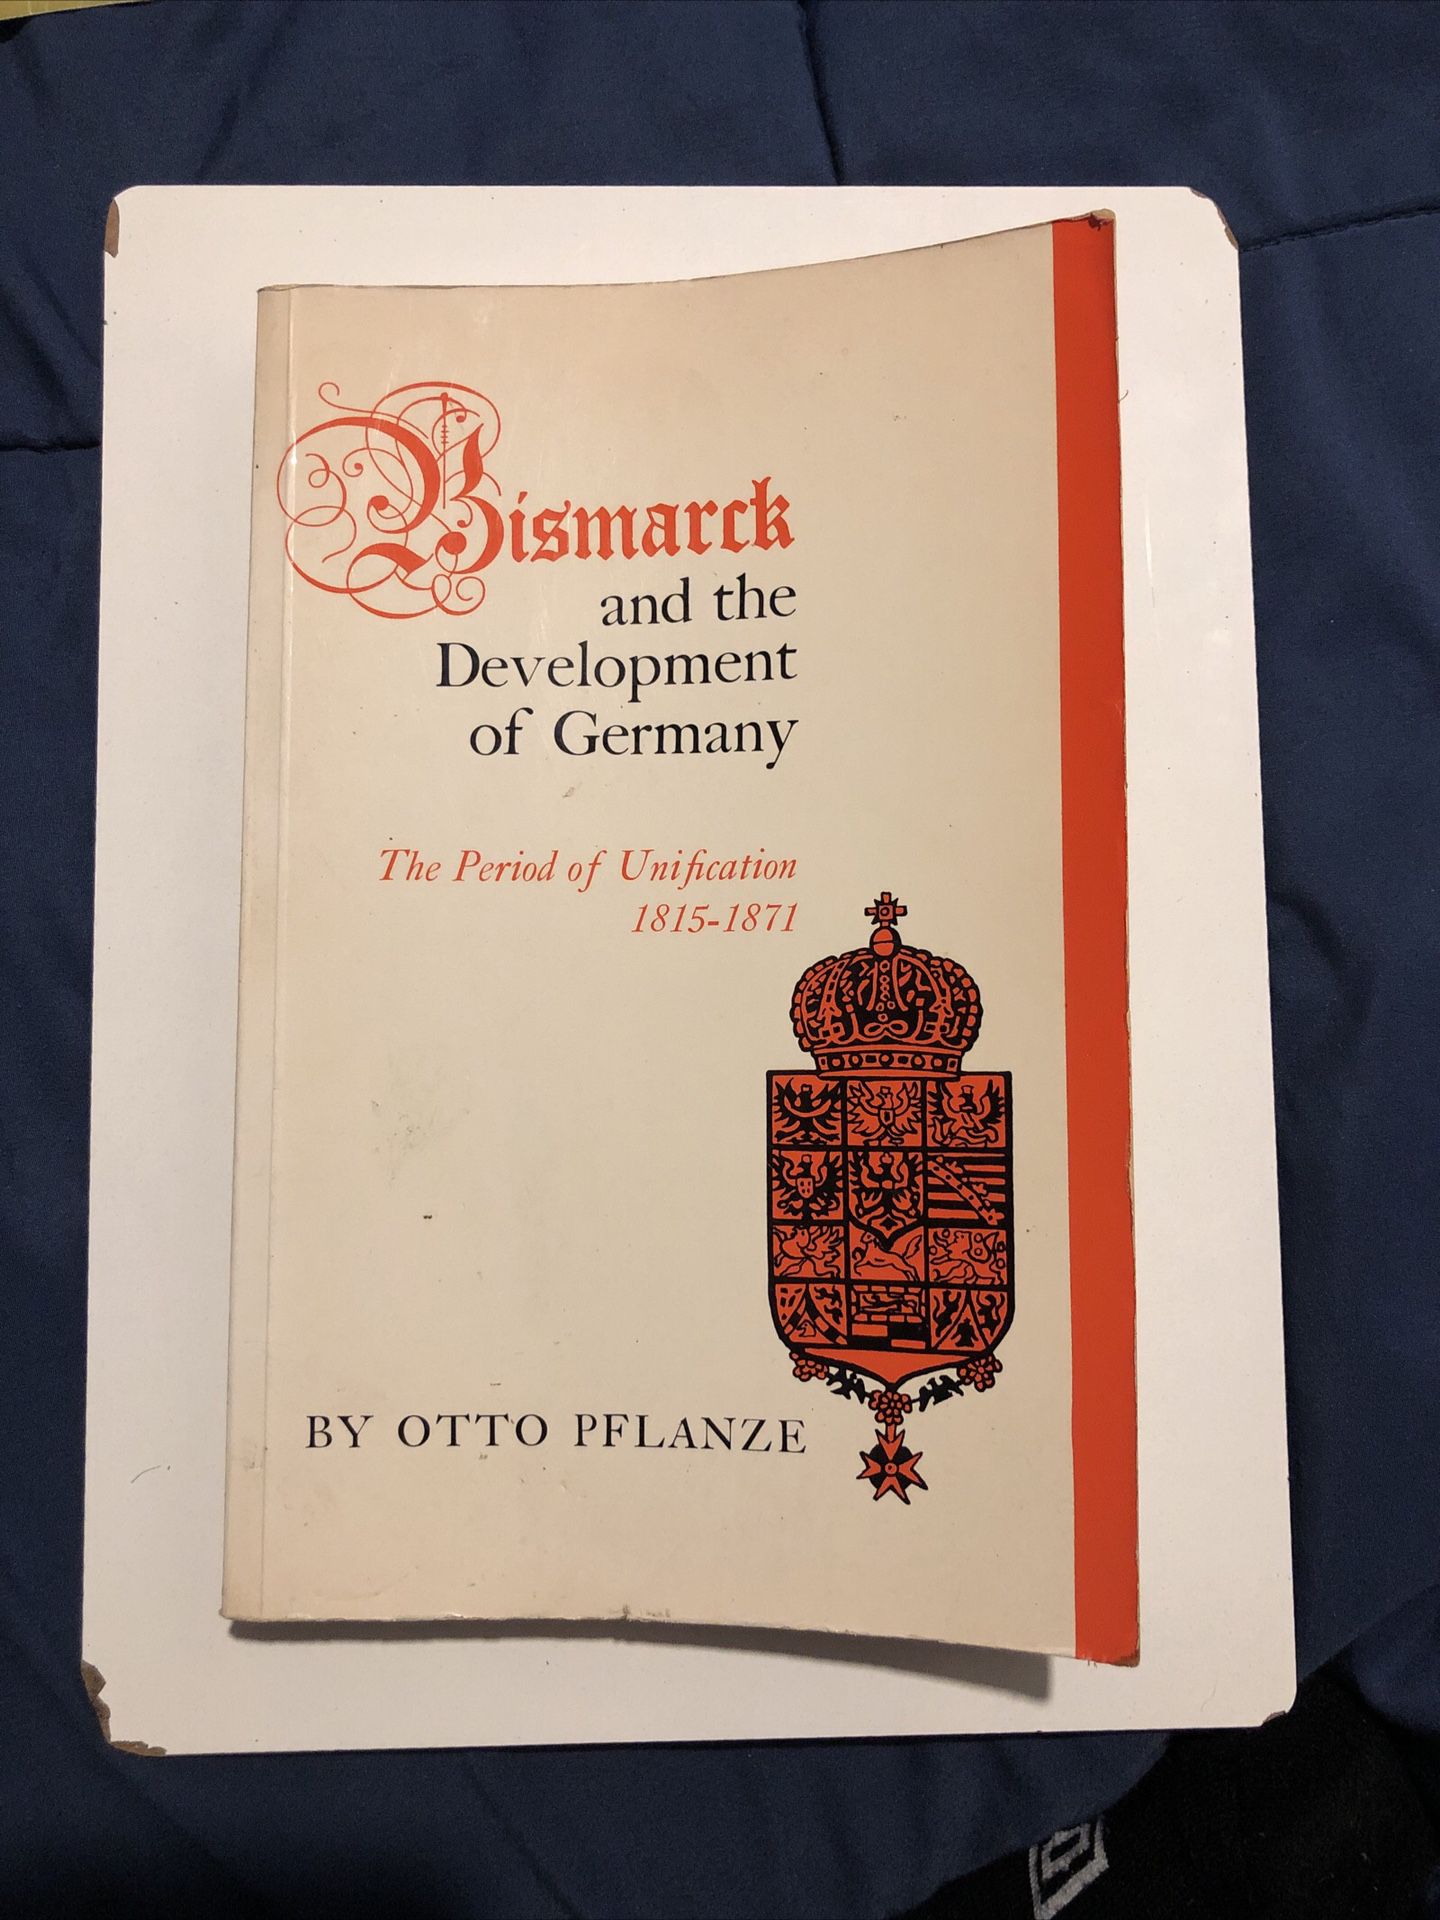 Bismarck and the Development of Germany oo: The Period of Unification, 1815 to 1871